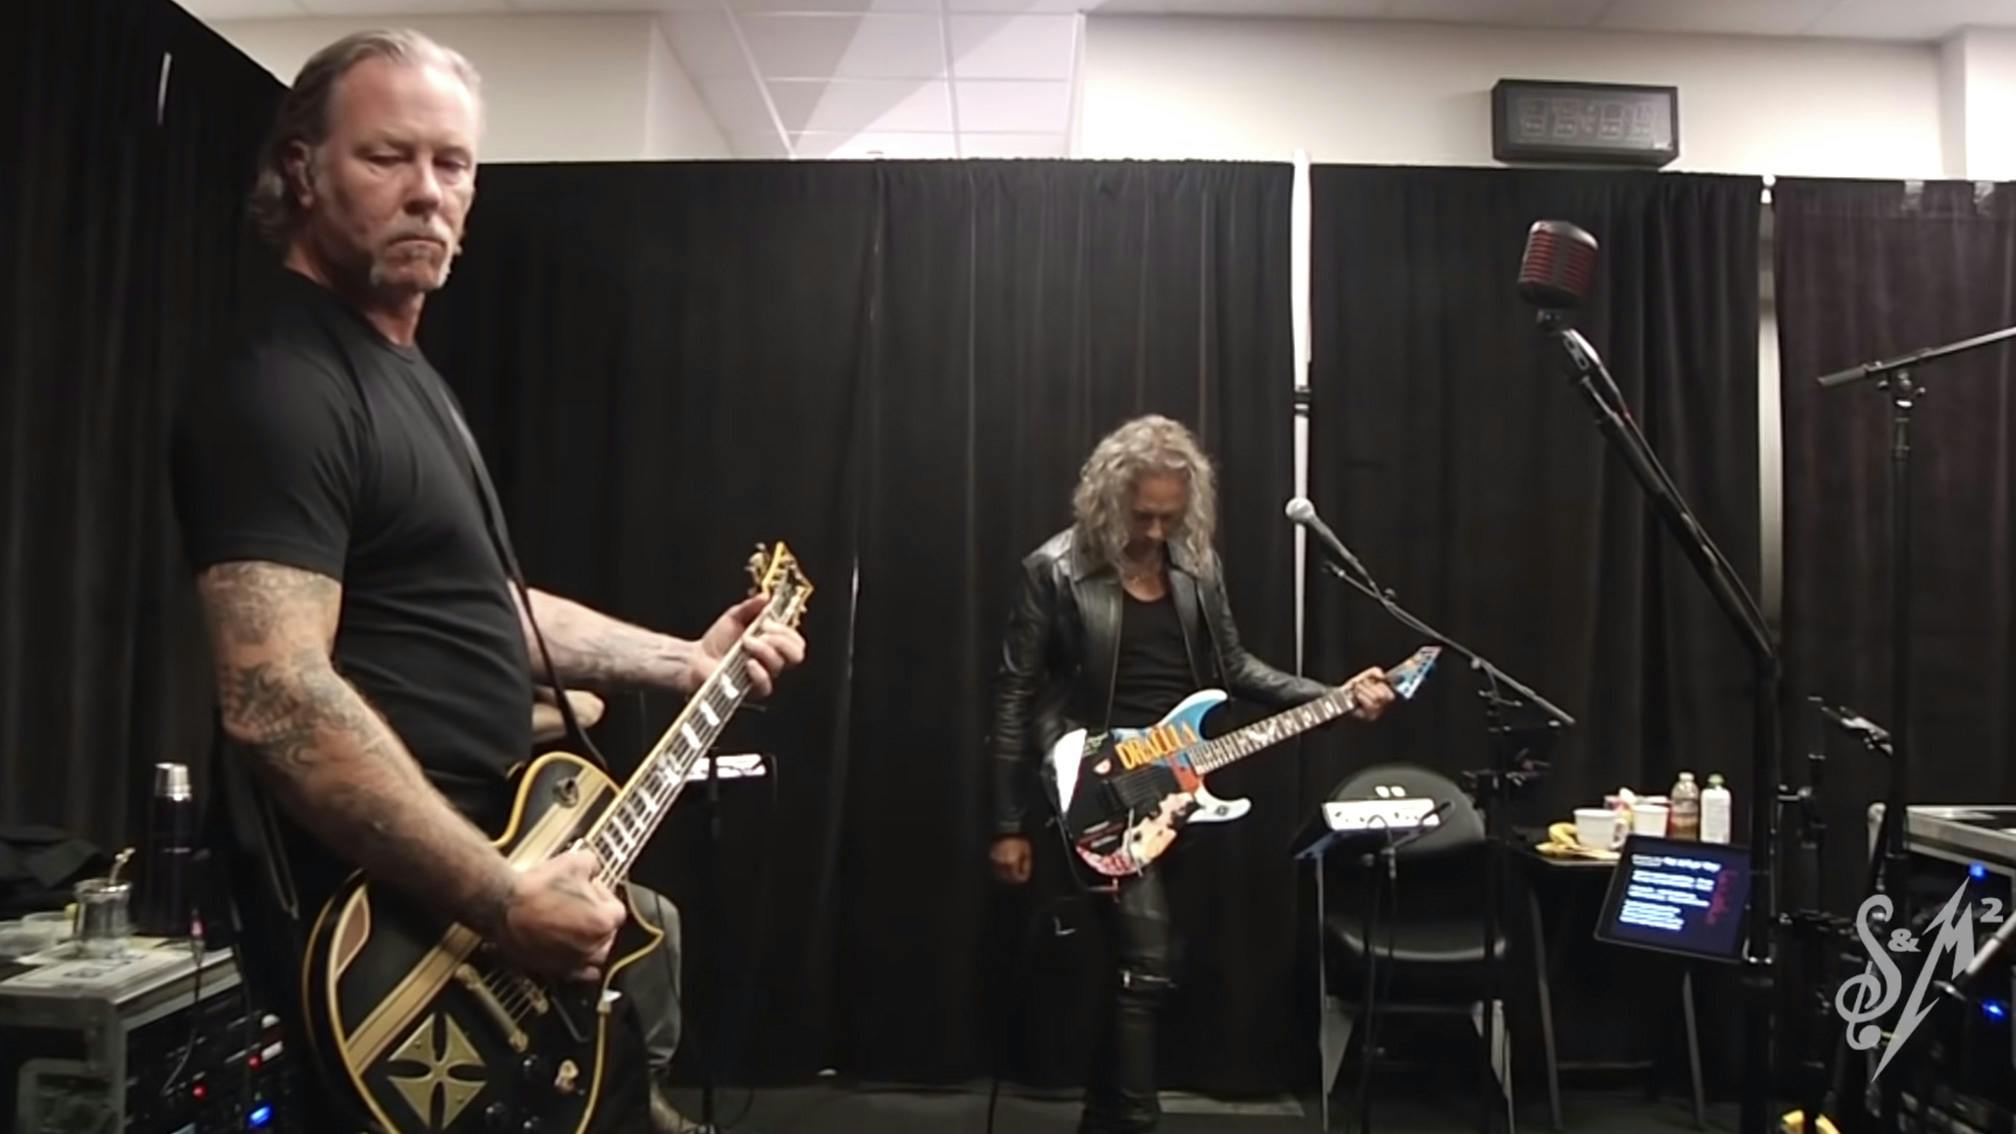 Go Inside Metallica's Tuning Room As They Rehearse For S&M2